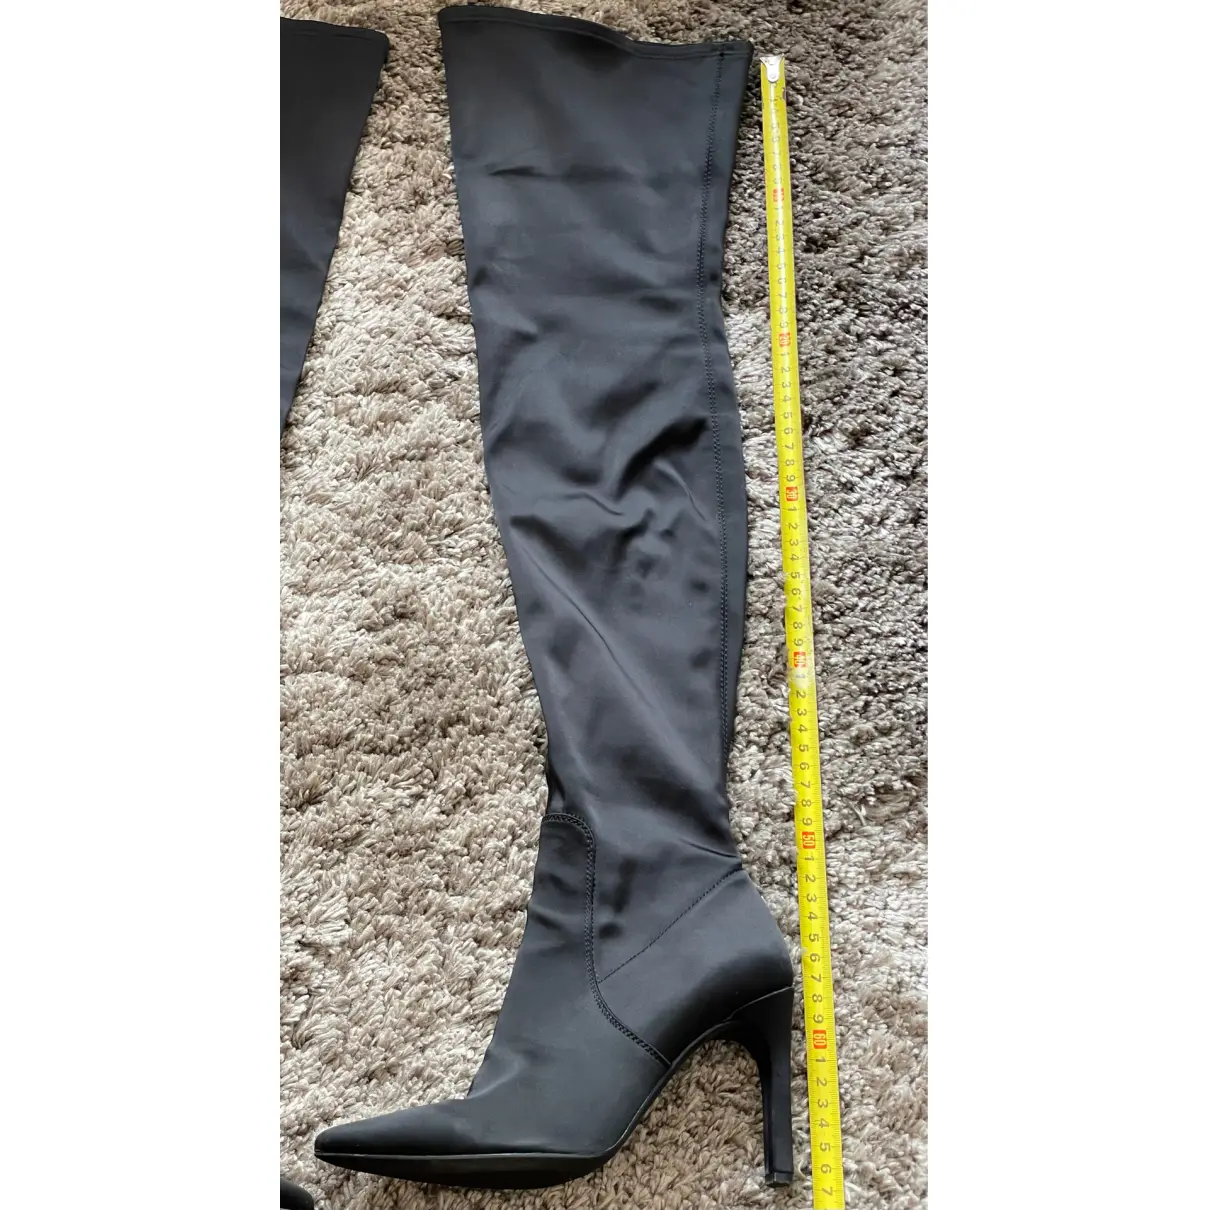 Cloth riding boots GEOX